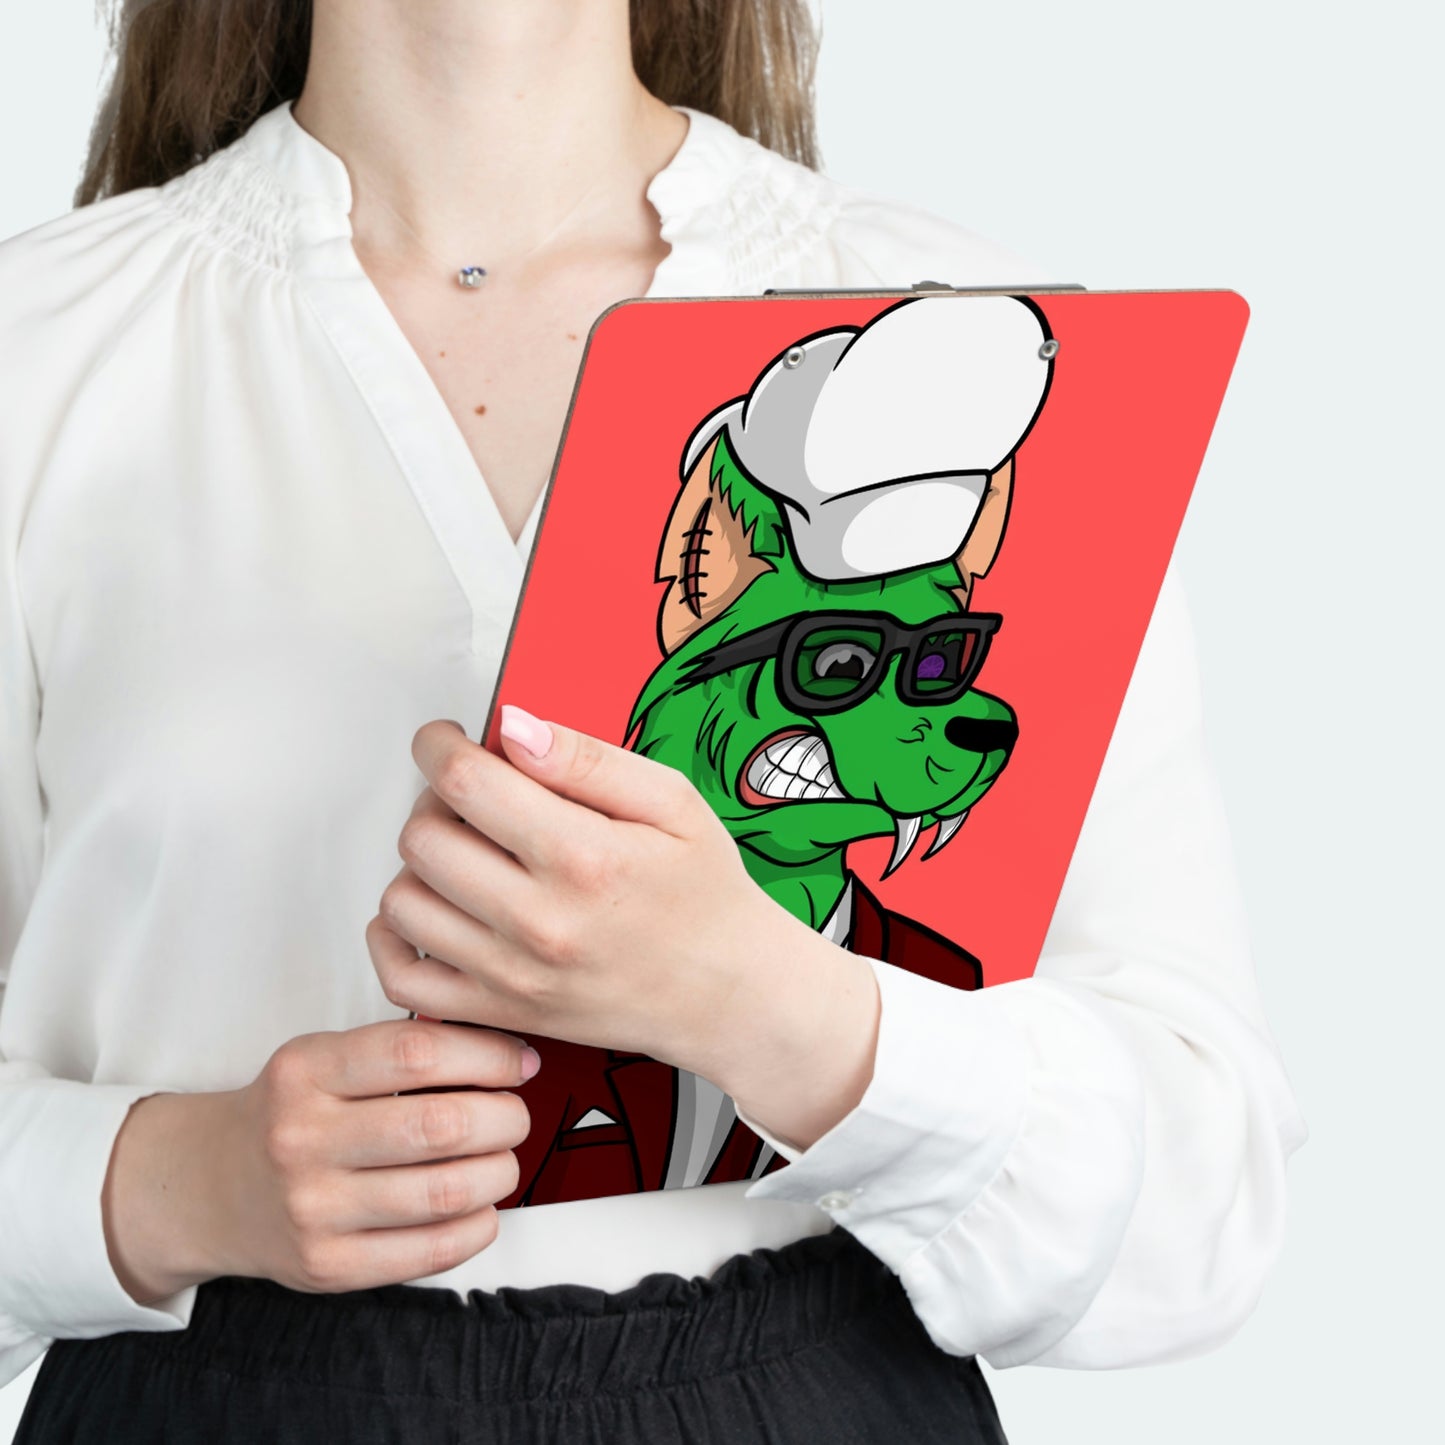 Chef Hat Wolf Cyborg Red Suit Clipboard